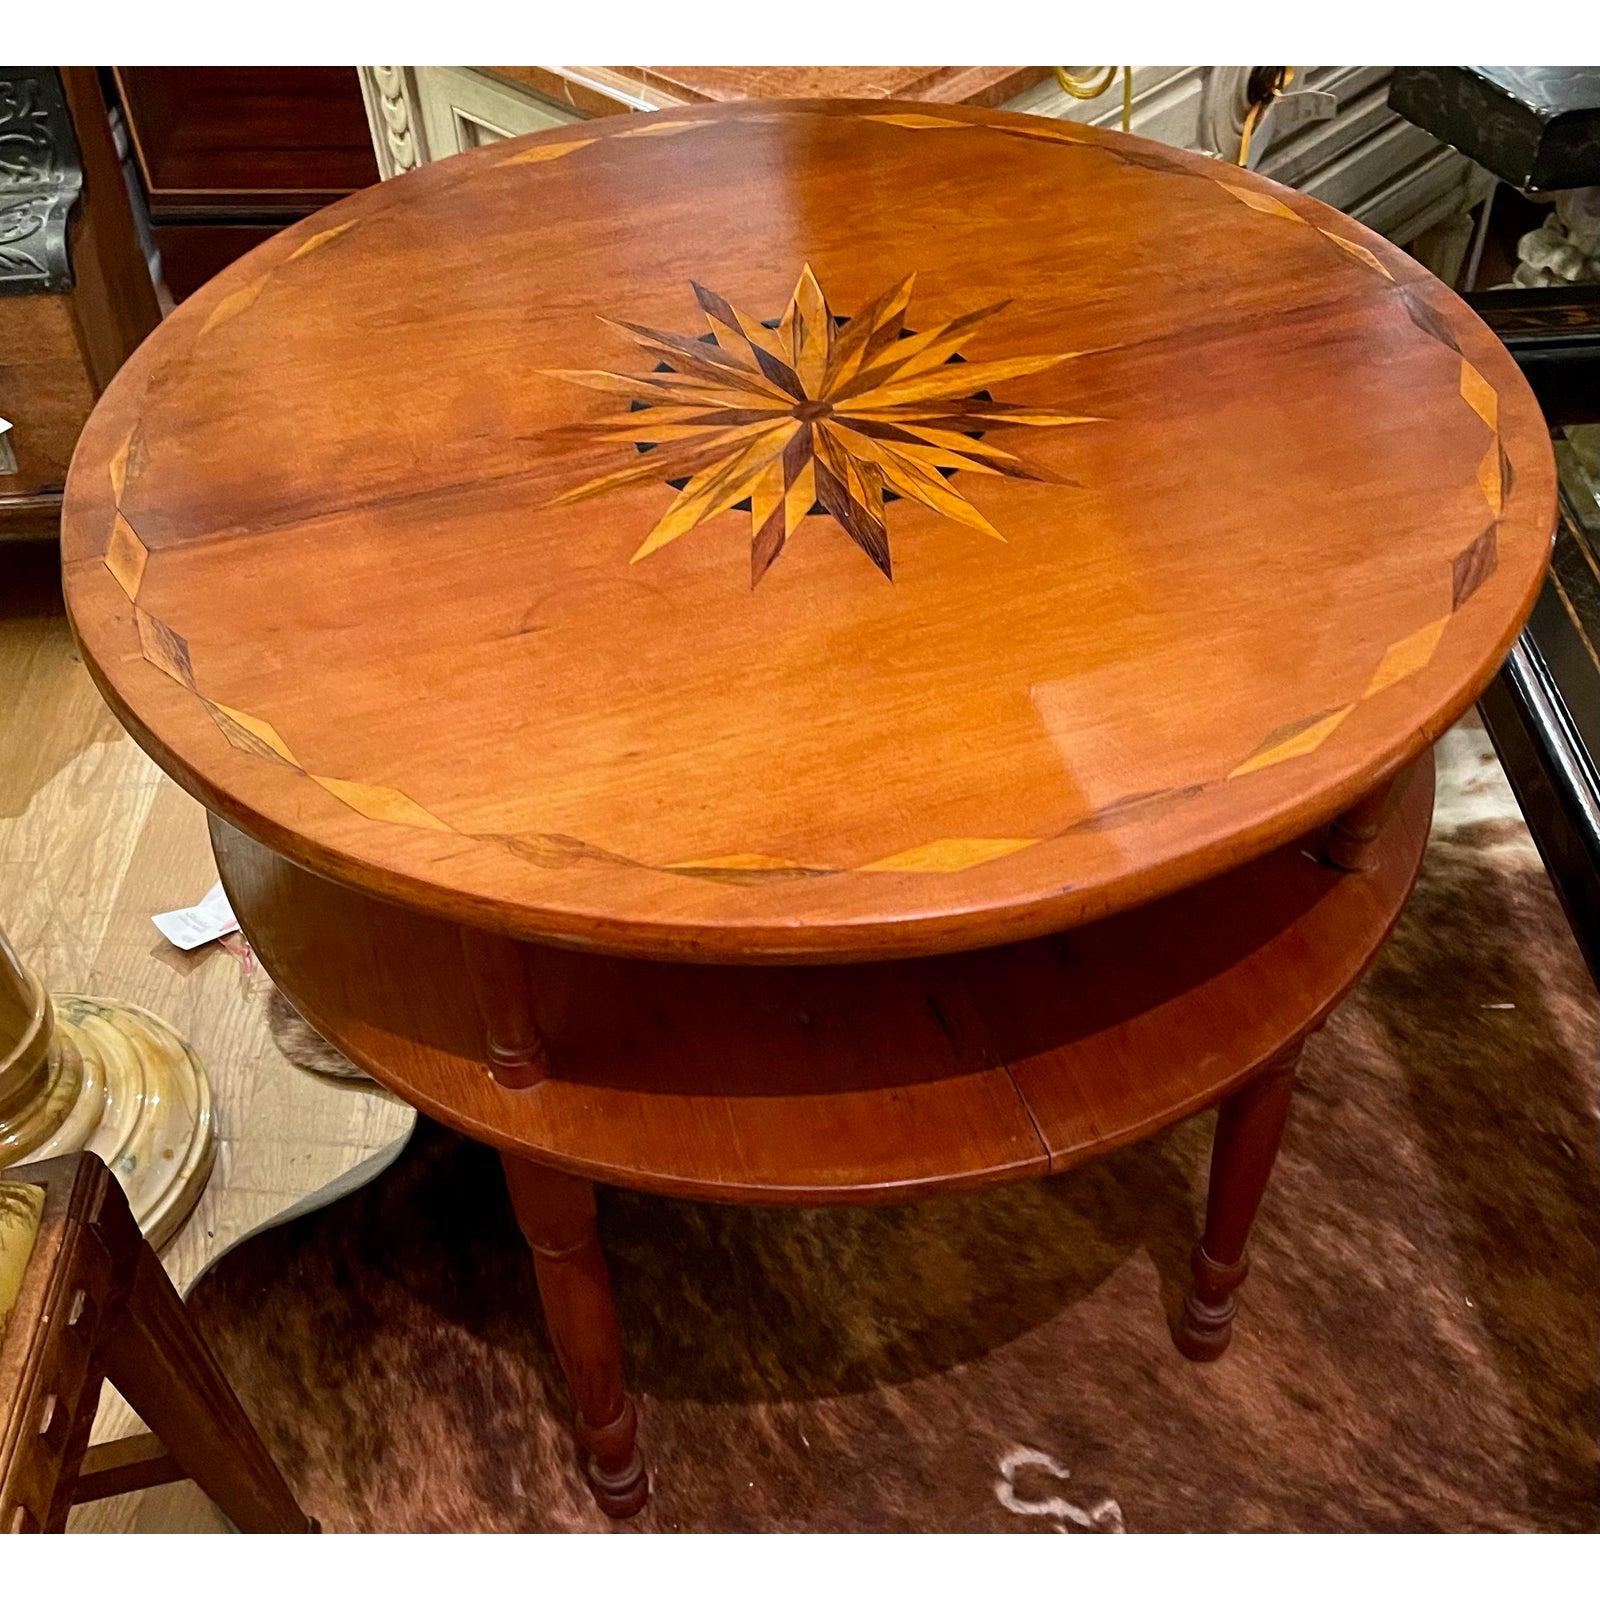 Antique Early 19th Century American Sheraton Inlaid Cherry Table In Good Condition For Sale In LOS ANGELES, CA